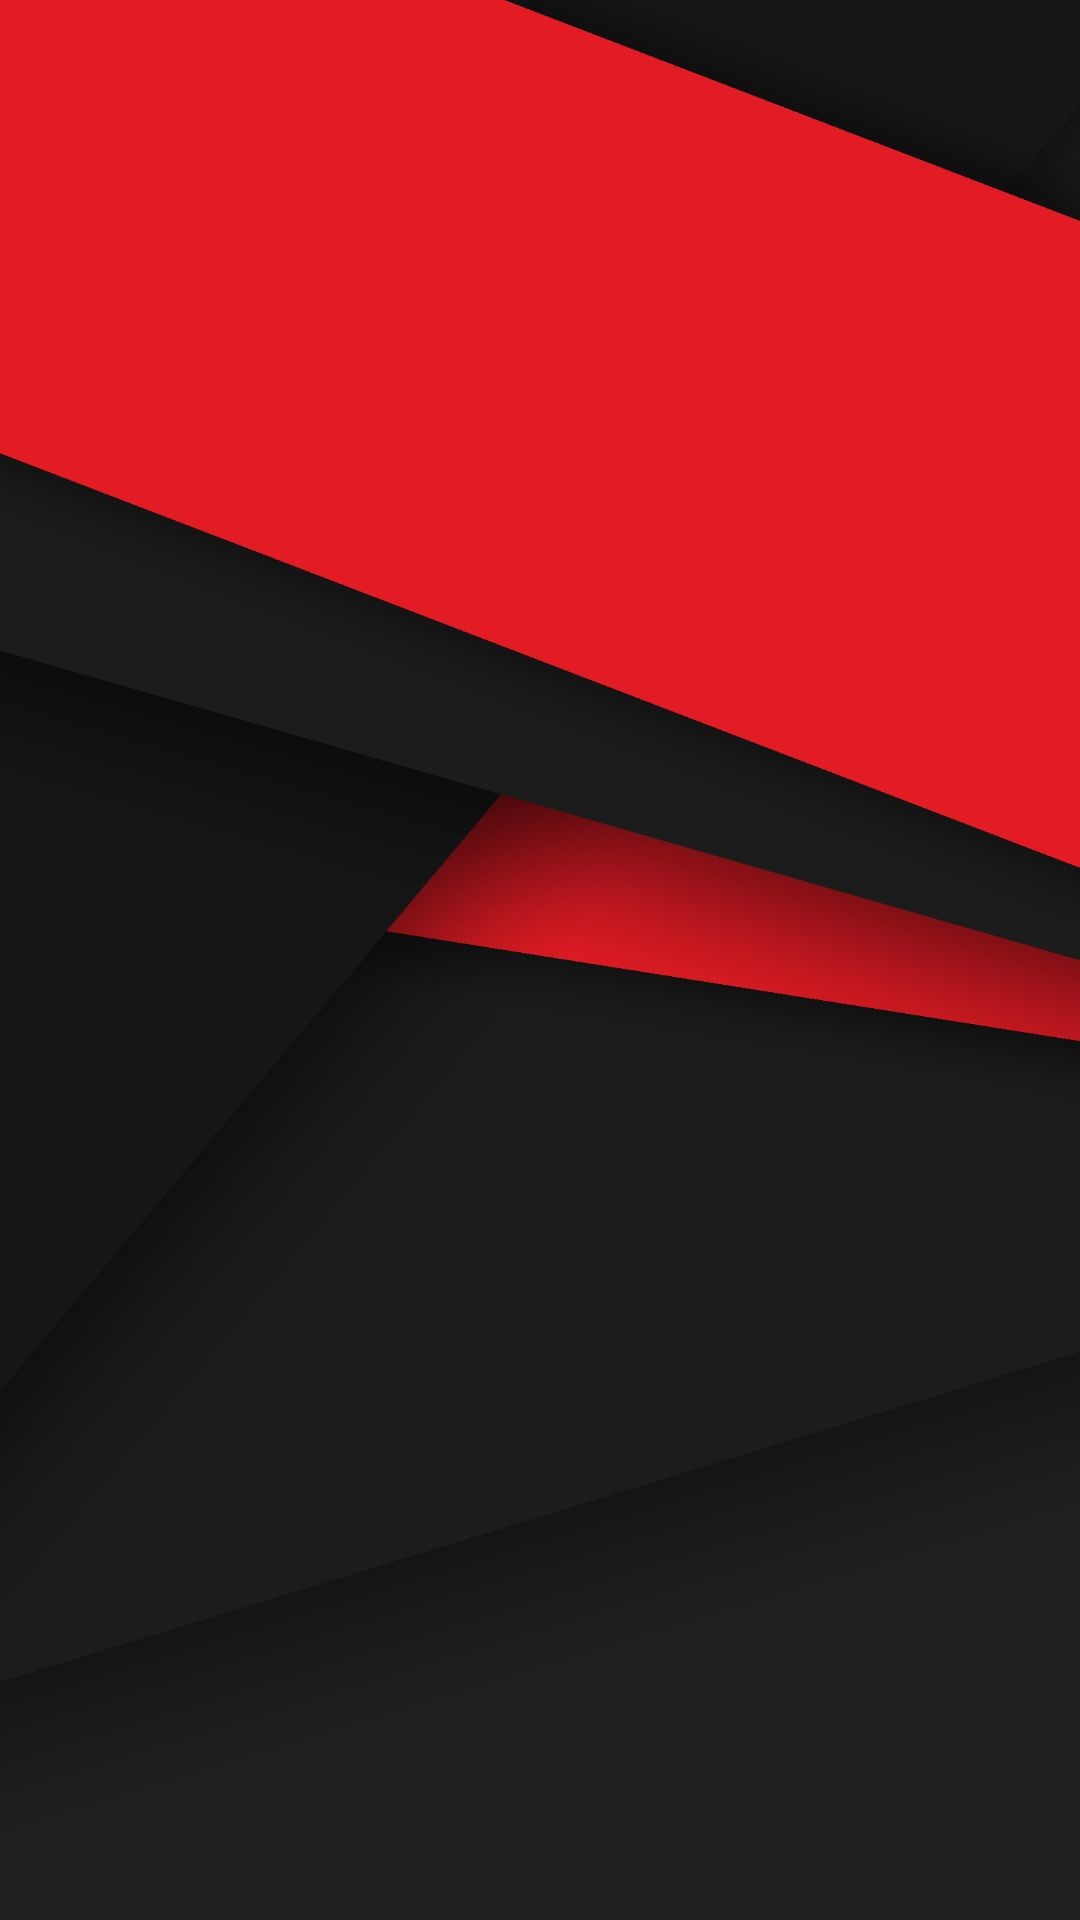 1080x1920 Image for Material Design Red Black HD Wallpapers for Android Mobile